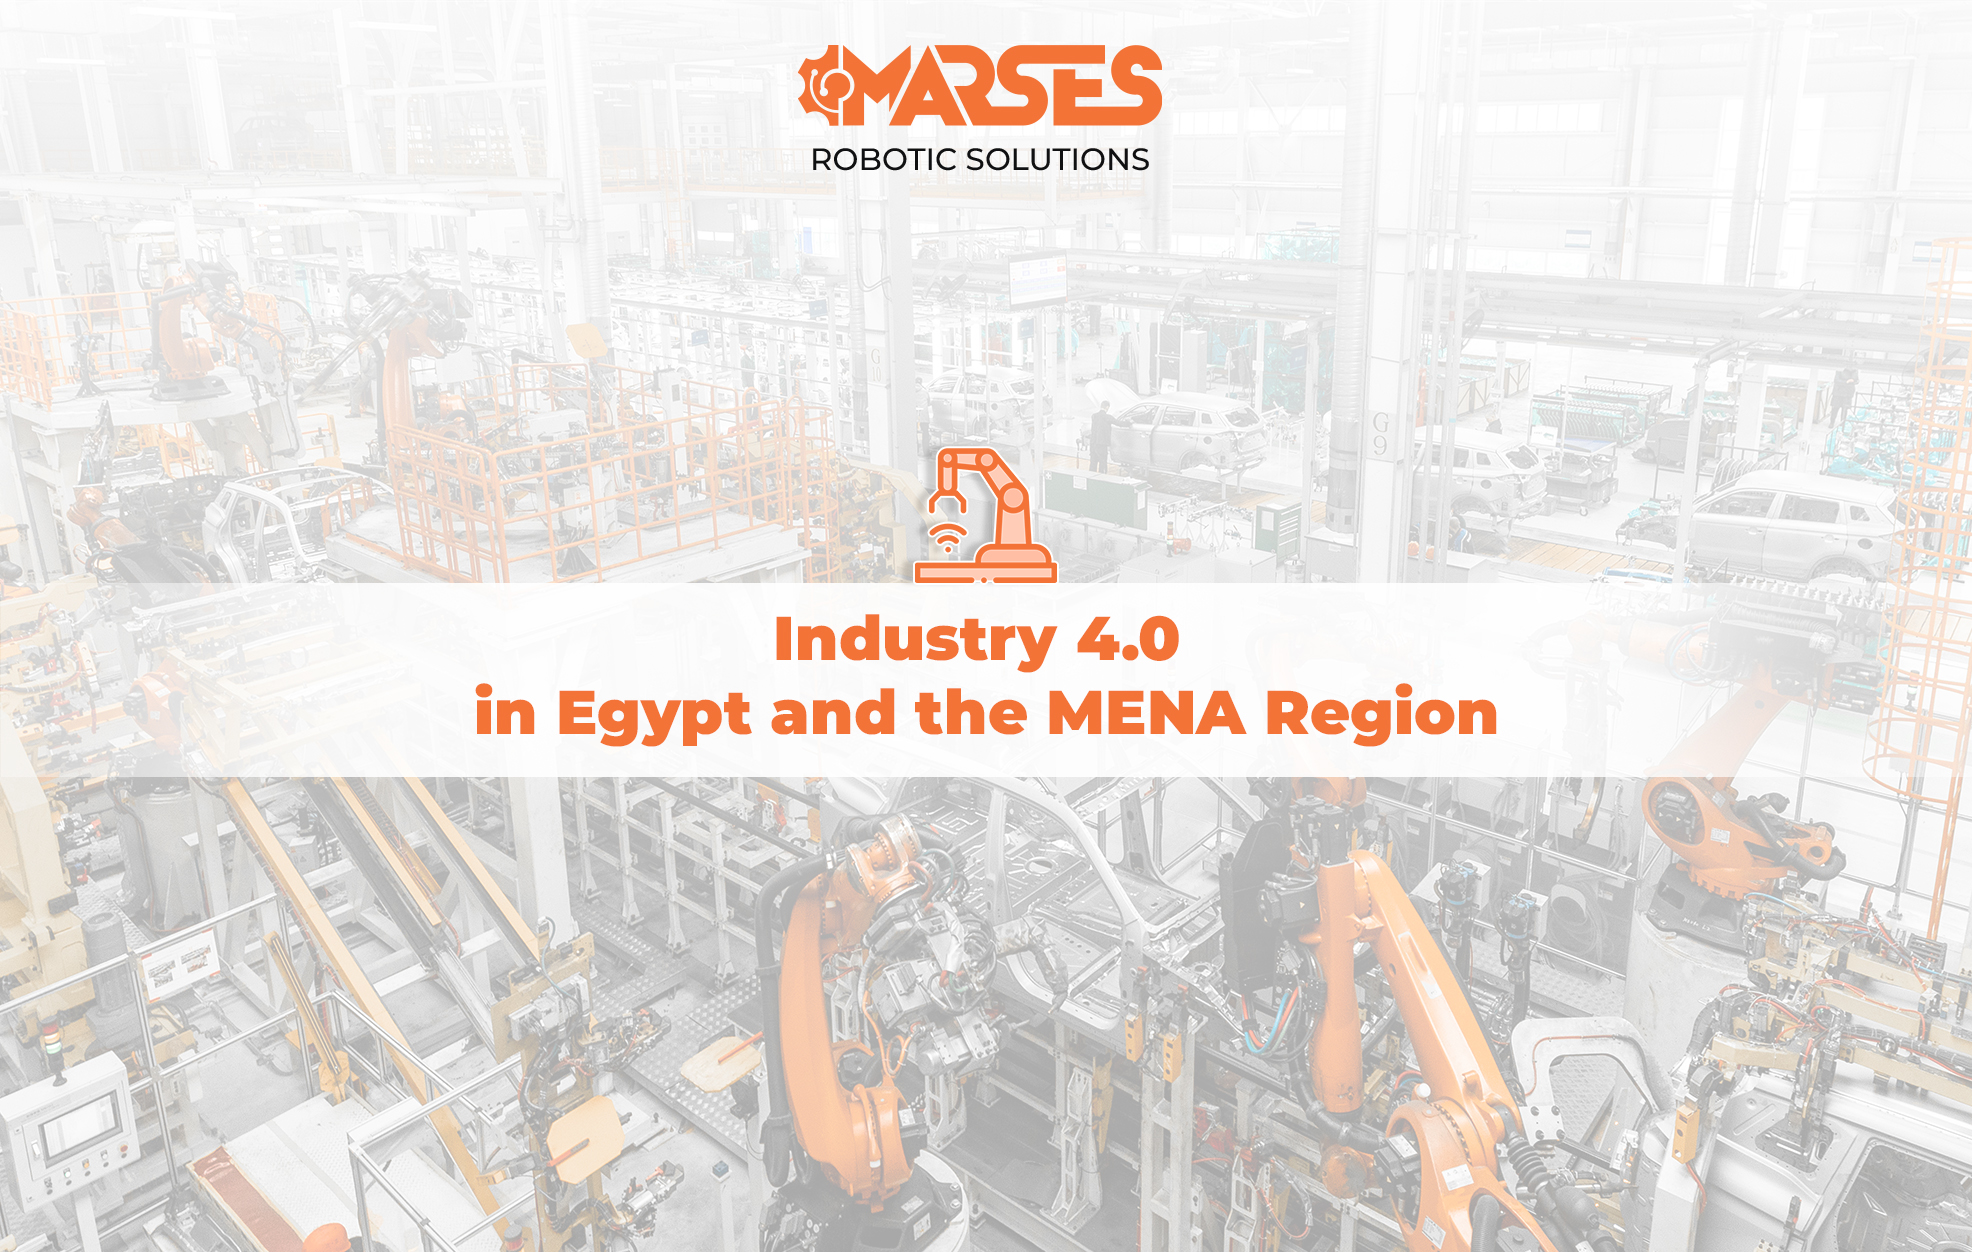 Industry 4.0 in Egypt and the MENA region